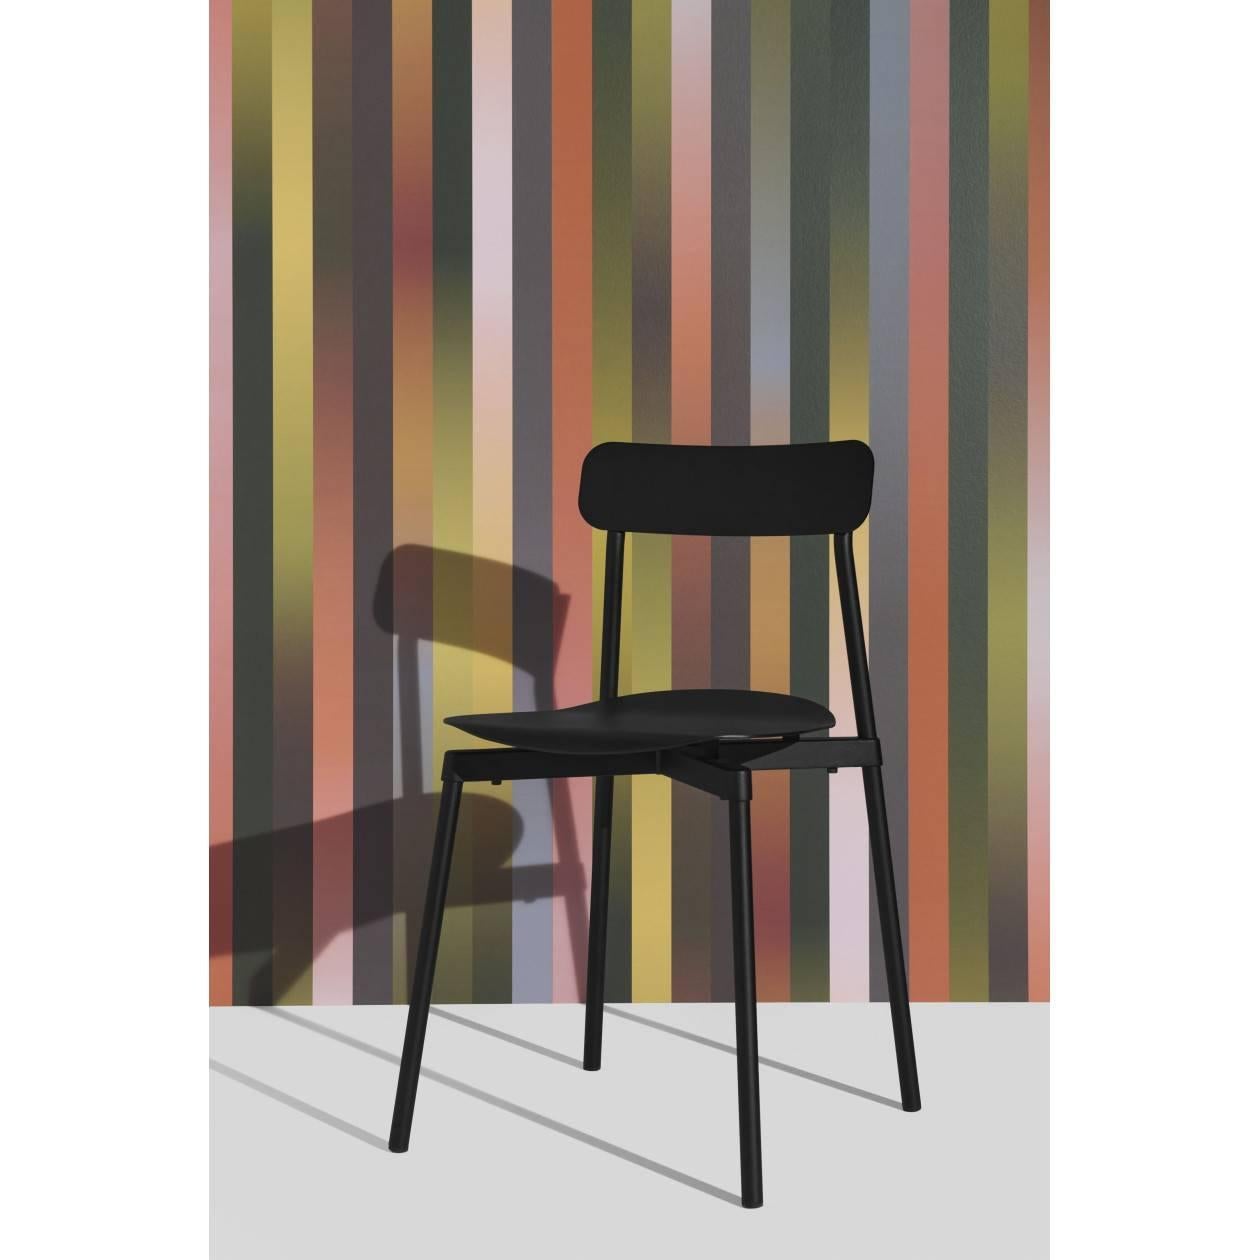 Infinitely more sophisticated than a simple two-tone creation, Carole Baijings has entirely reinvented the Iconic French stripes with a shifting colour palette. Through her range of wallpaper and panorama prints, each vertical stripe is a line of